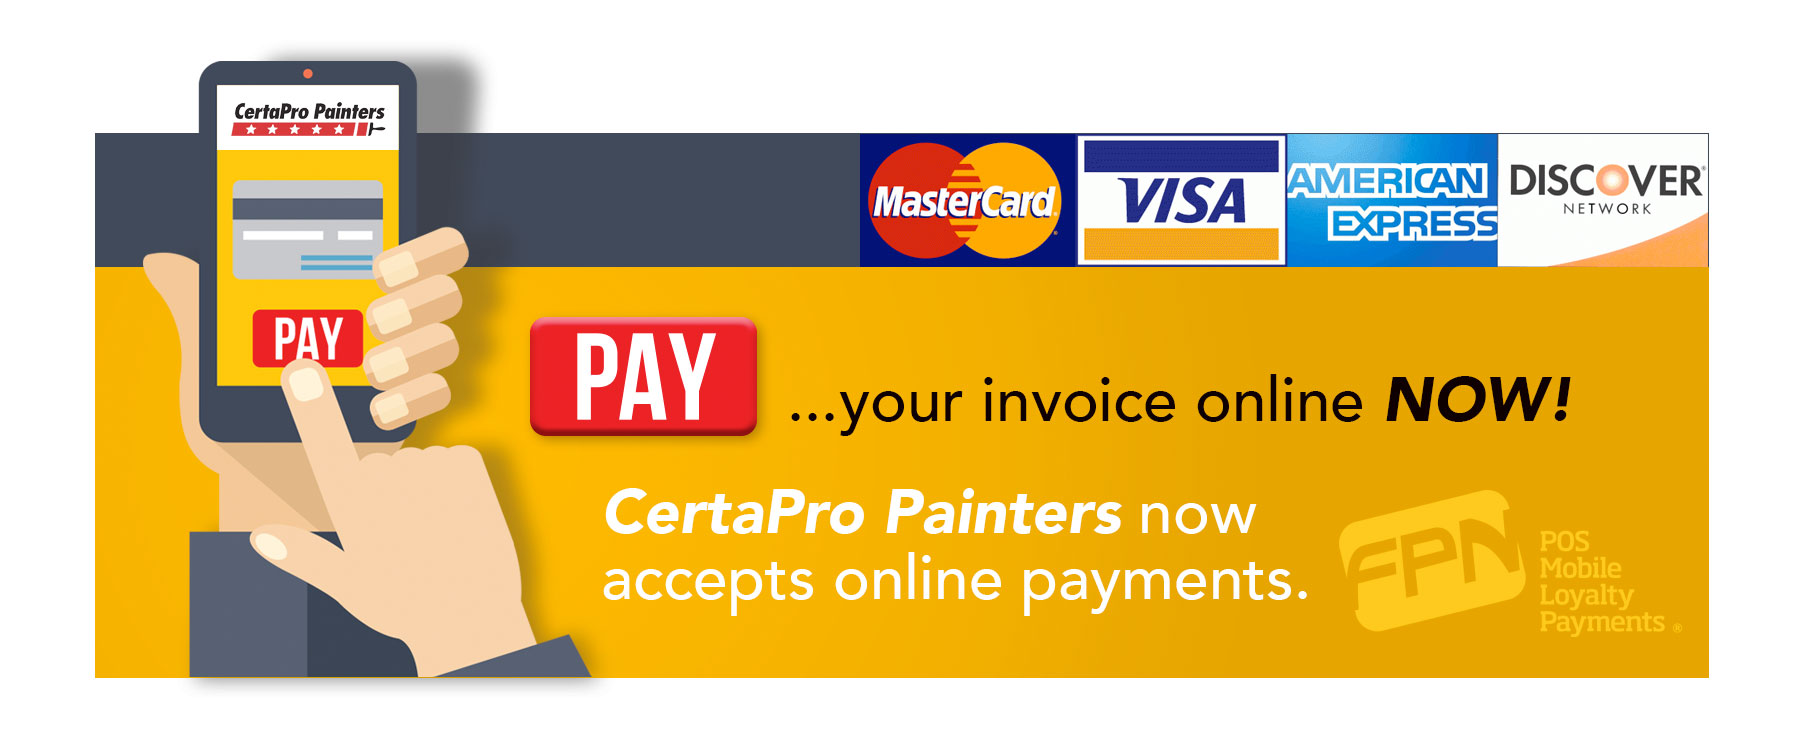 Pay your invoice online here